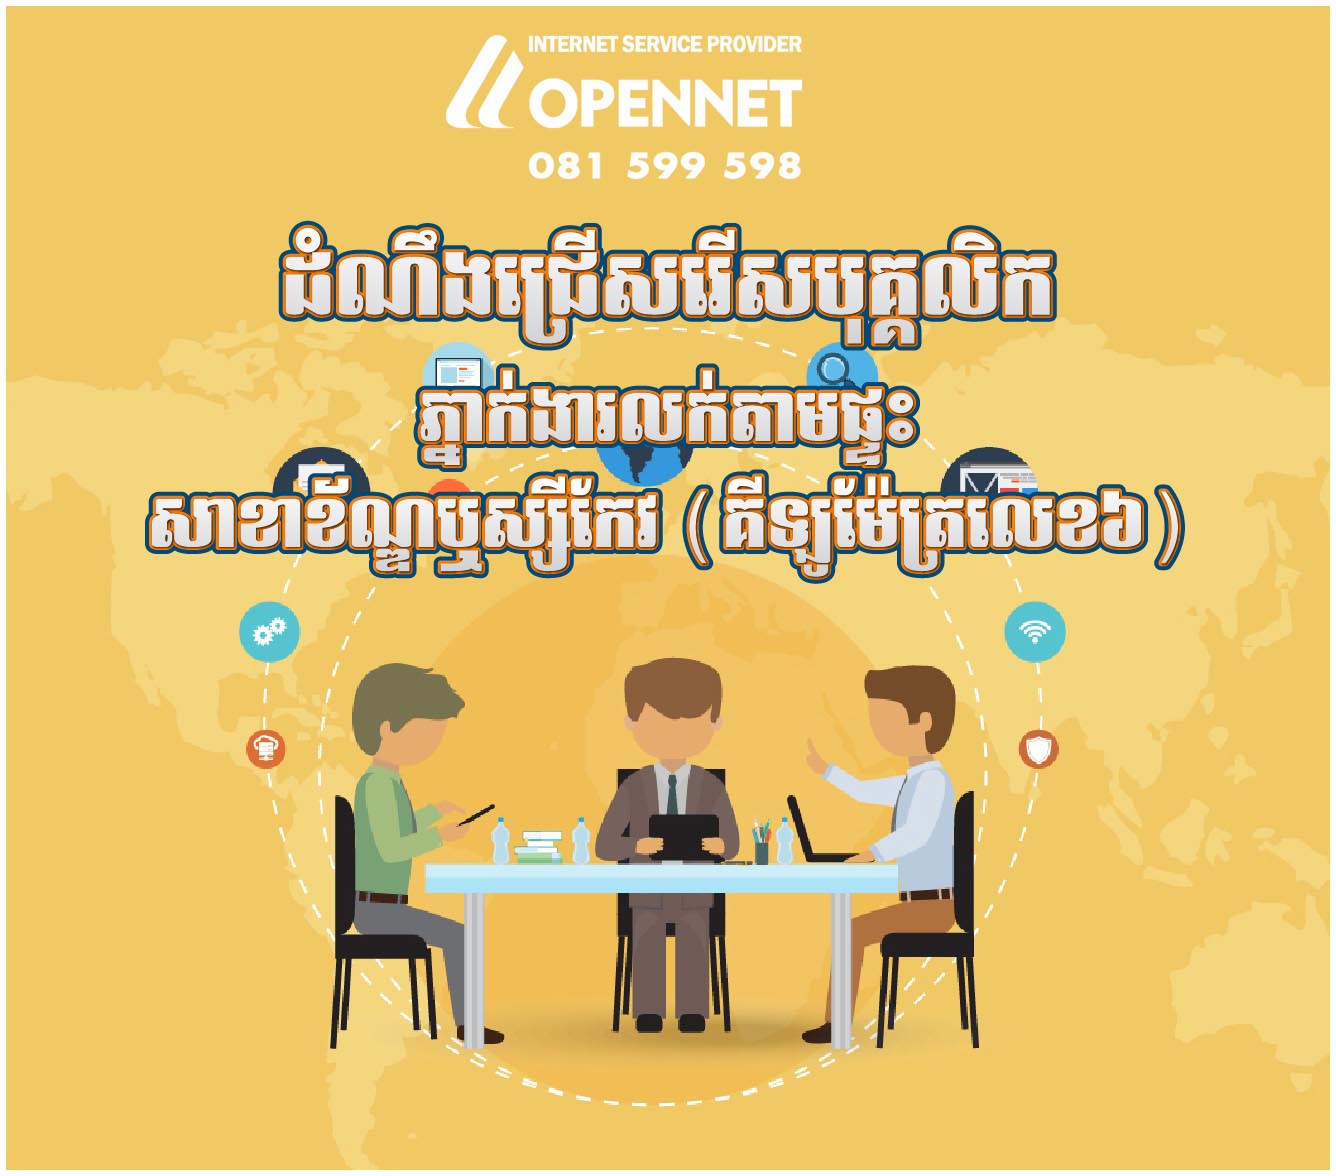 Opennet Cambodia